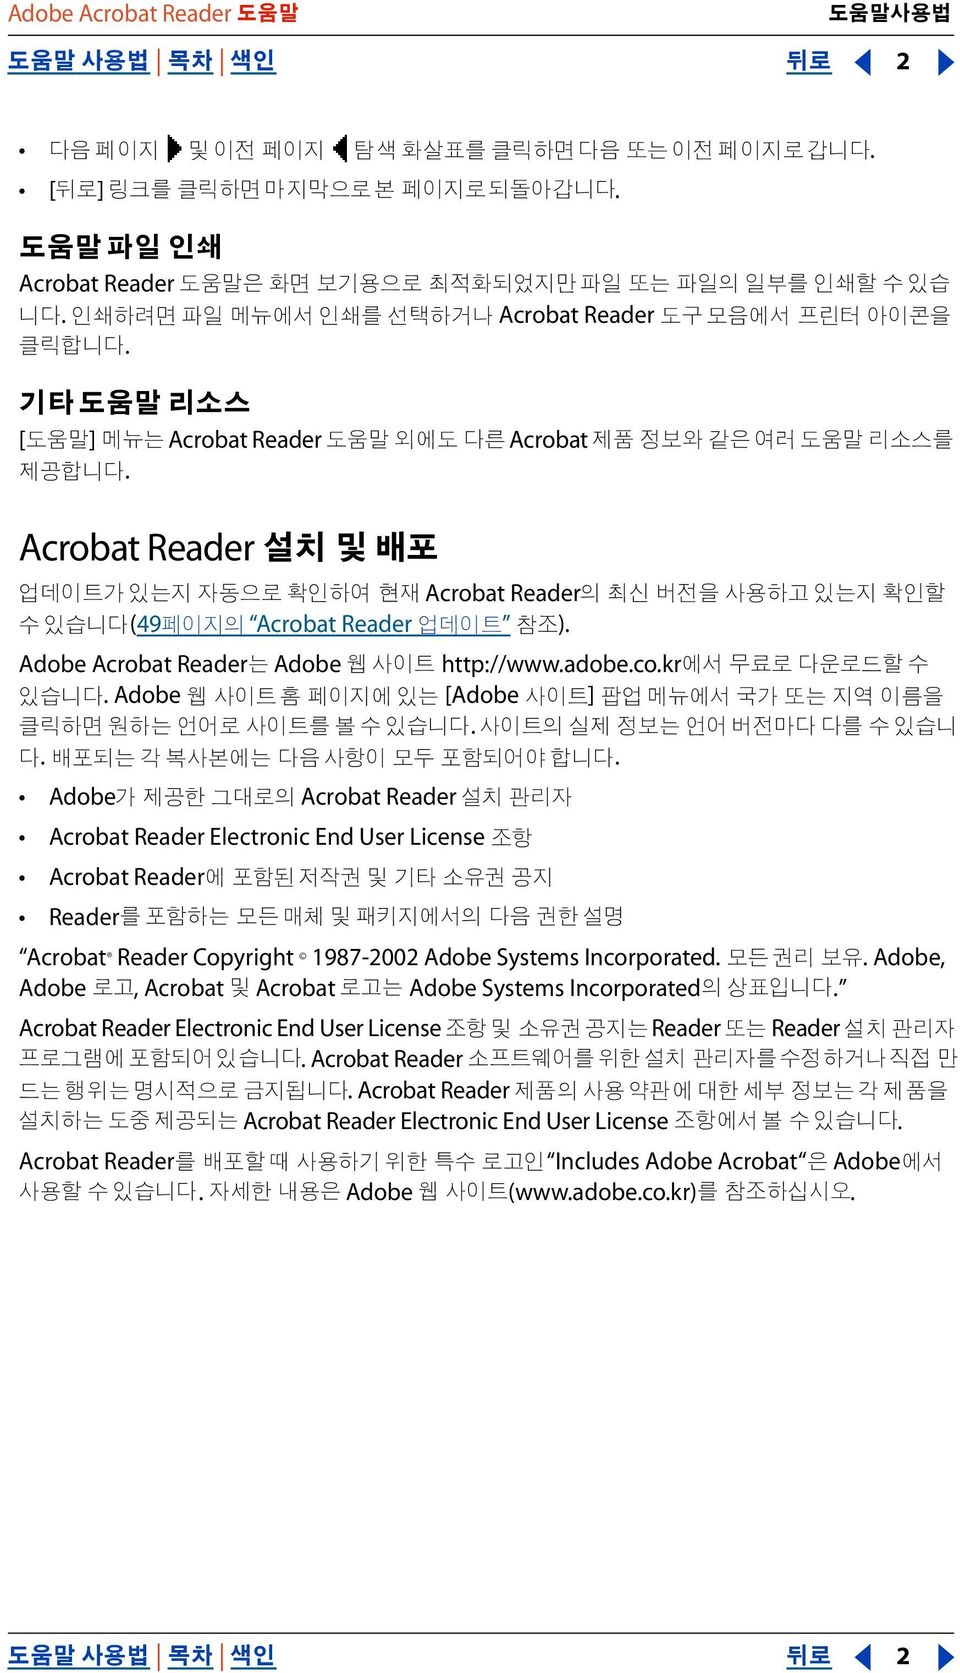 .. Adobe Acrobat Reader Acrobat Reader Electronic End User License Acrobat Reader Reader Acrobat Reader Copyright 1987-2002 Adobe Systems Incorporated.